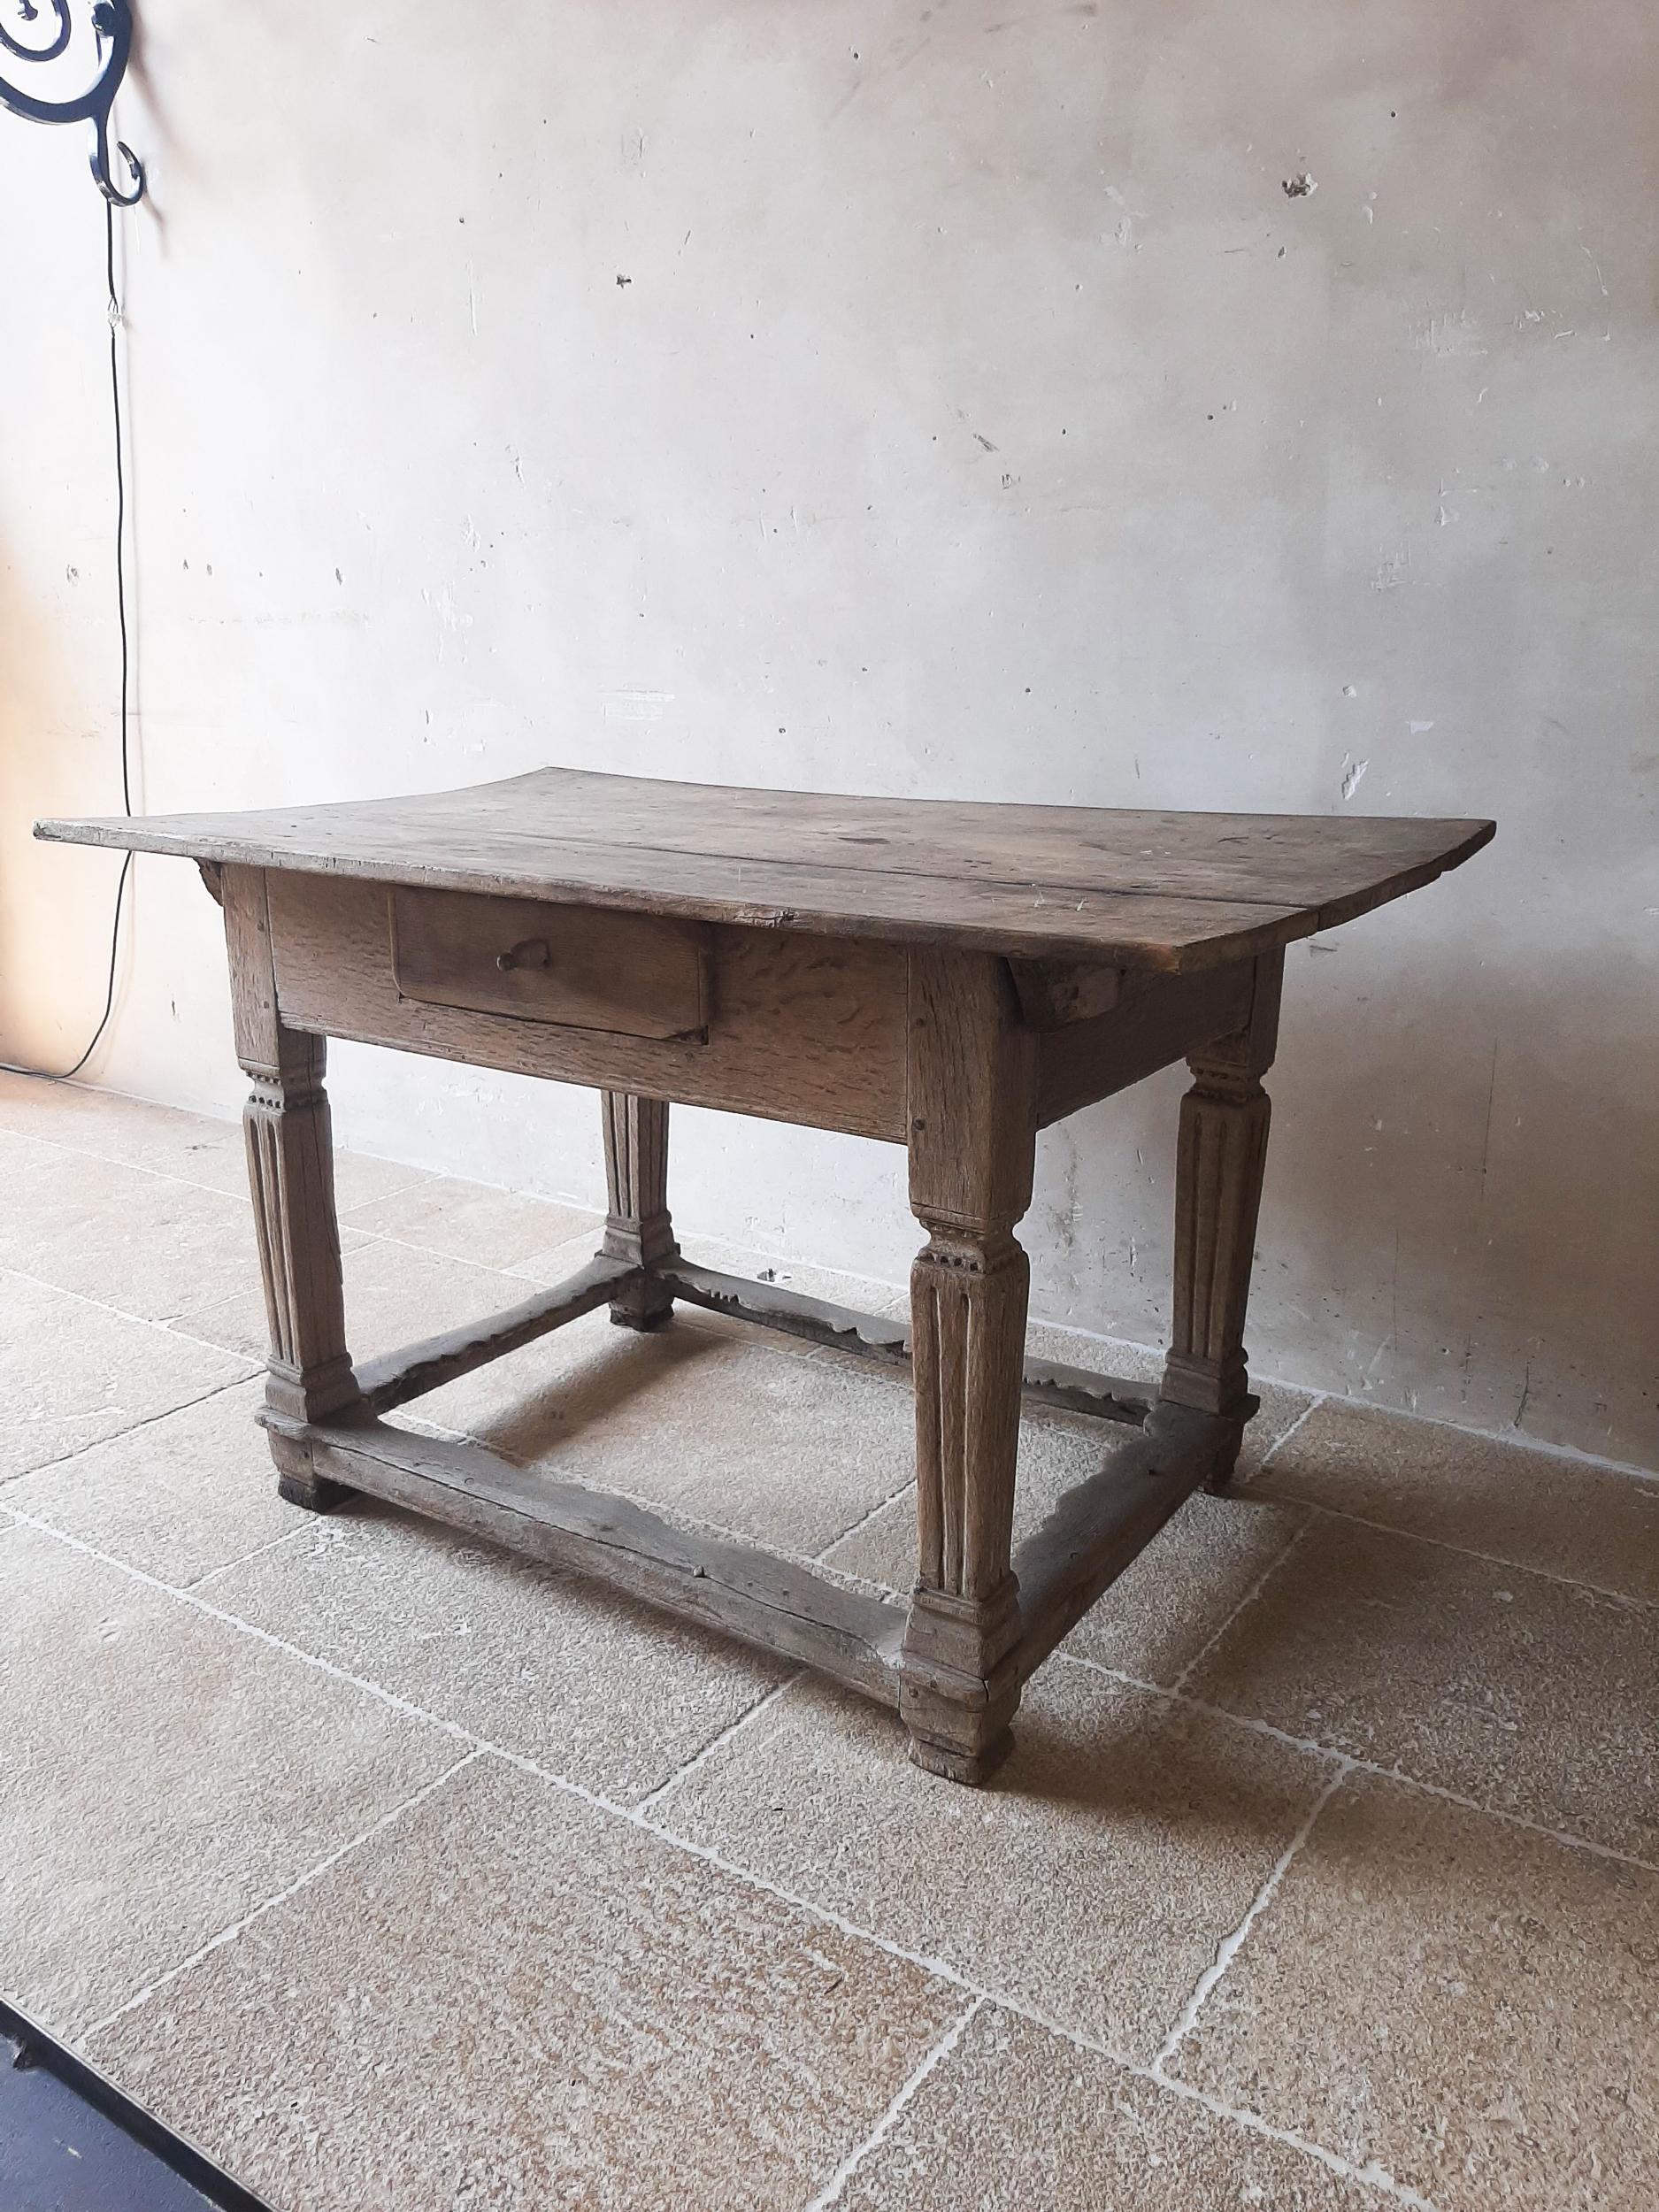 17th century oak Dutch pay table with balluster-shaped legs, partly fluted with lines with accolade motif in between. With drawer. The oak is beautiful white with a gray tint (not sandblasted). Dutch Renaissance ±1650.

Dimensions: L 125.5 x W 78